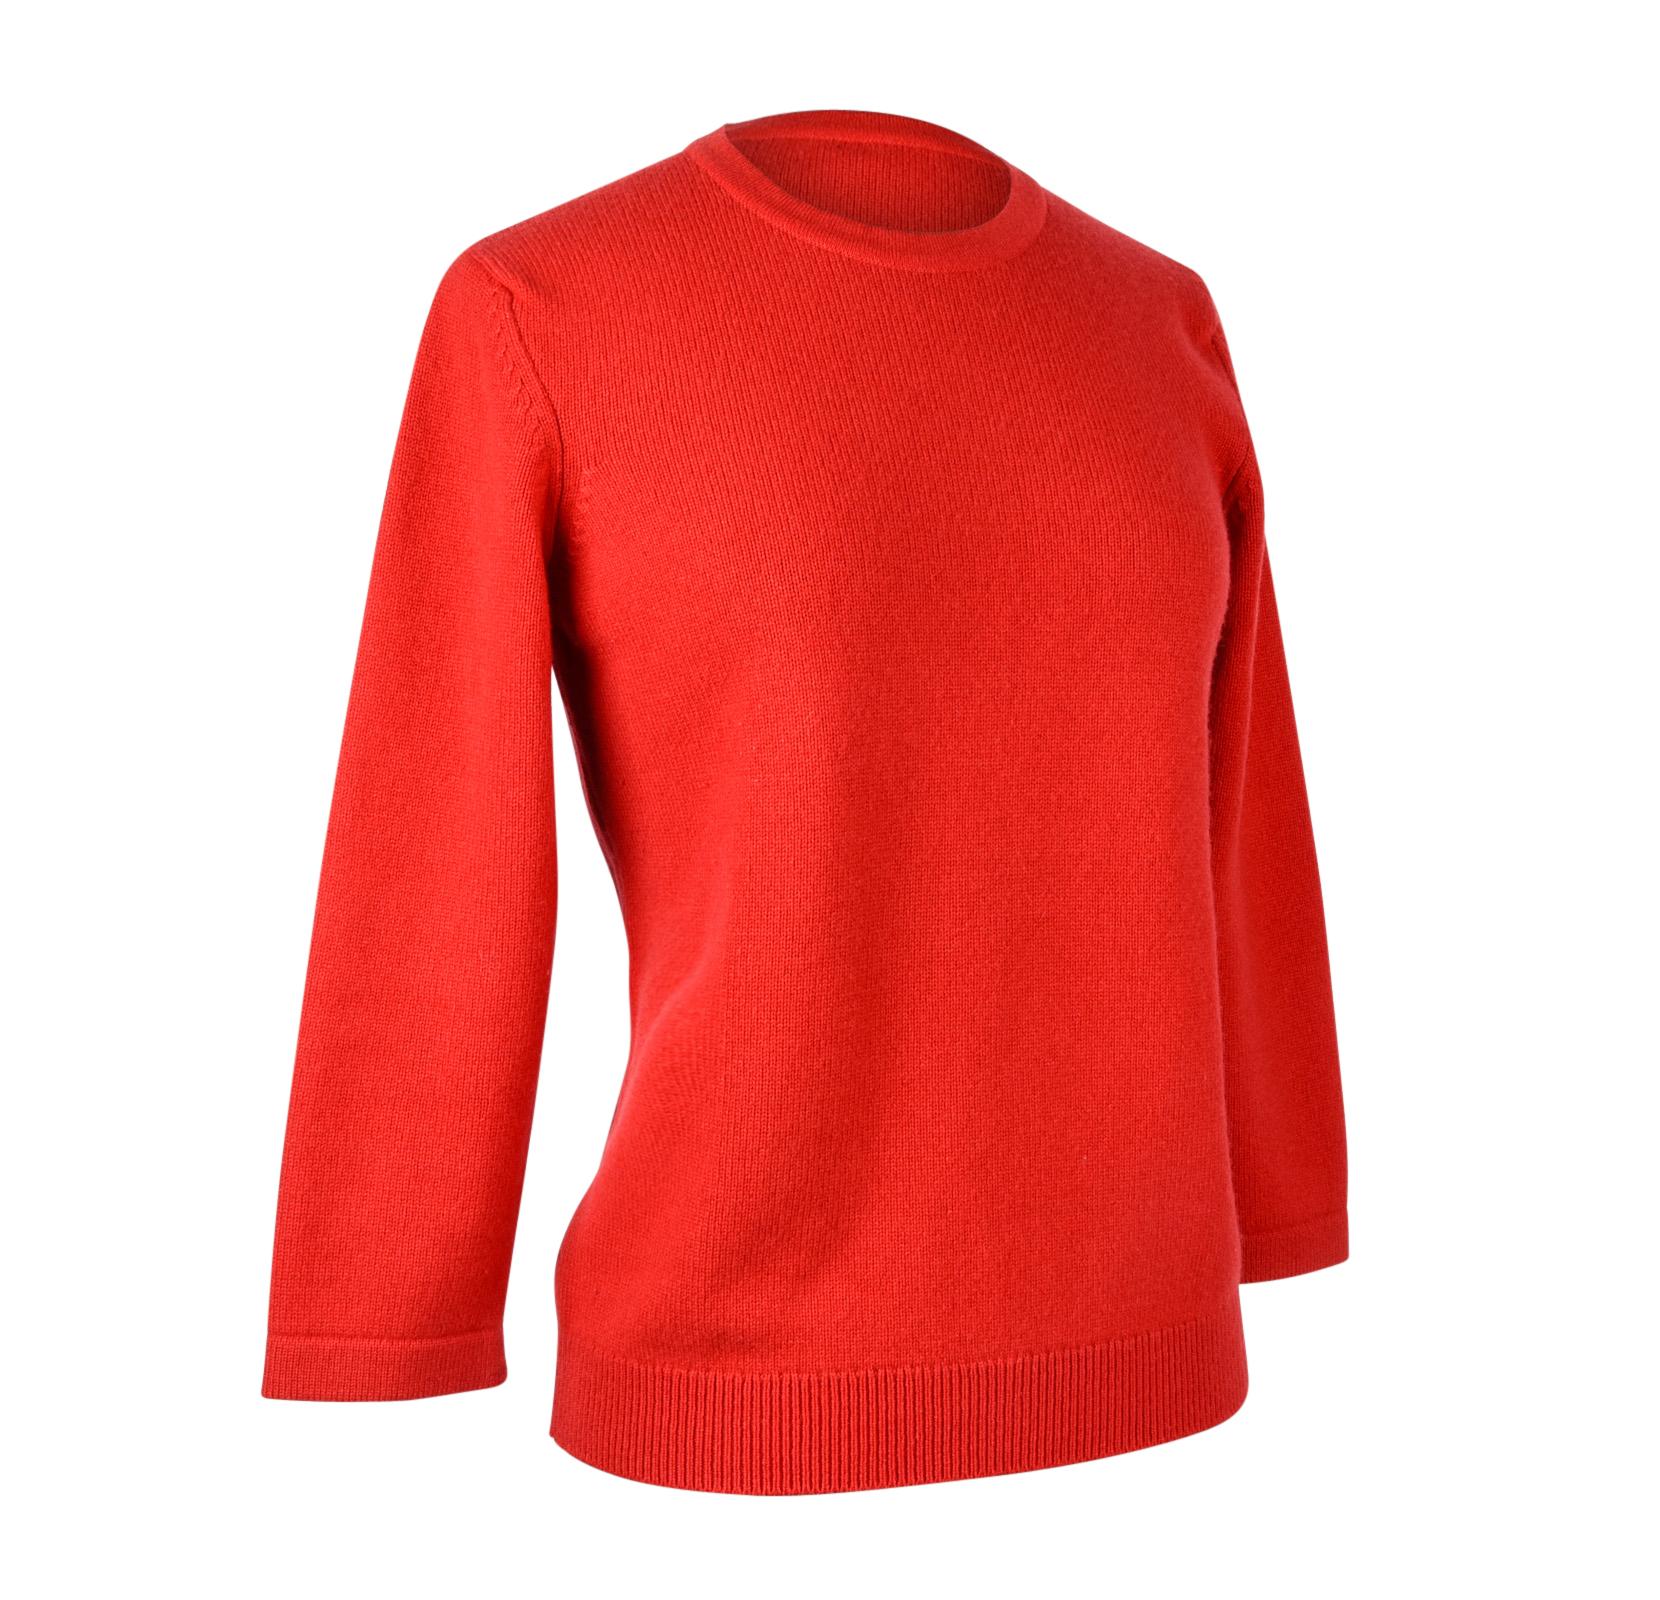 Guaranteed authentic Hermes red pullover sweater.
Crew neck and 3/4 length sleeve.
Sweater has ribbing around cuffs and hip.
No size or fabric tag.
Very minor piling.
final sale

SIZE fits S - M

SWEATER MEASURES:
LENGTH  22.5